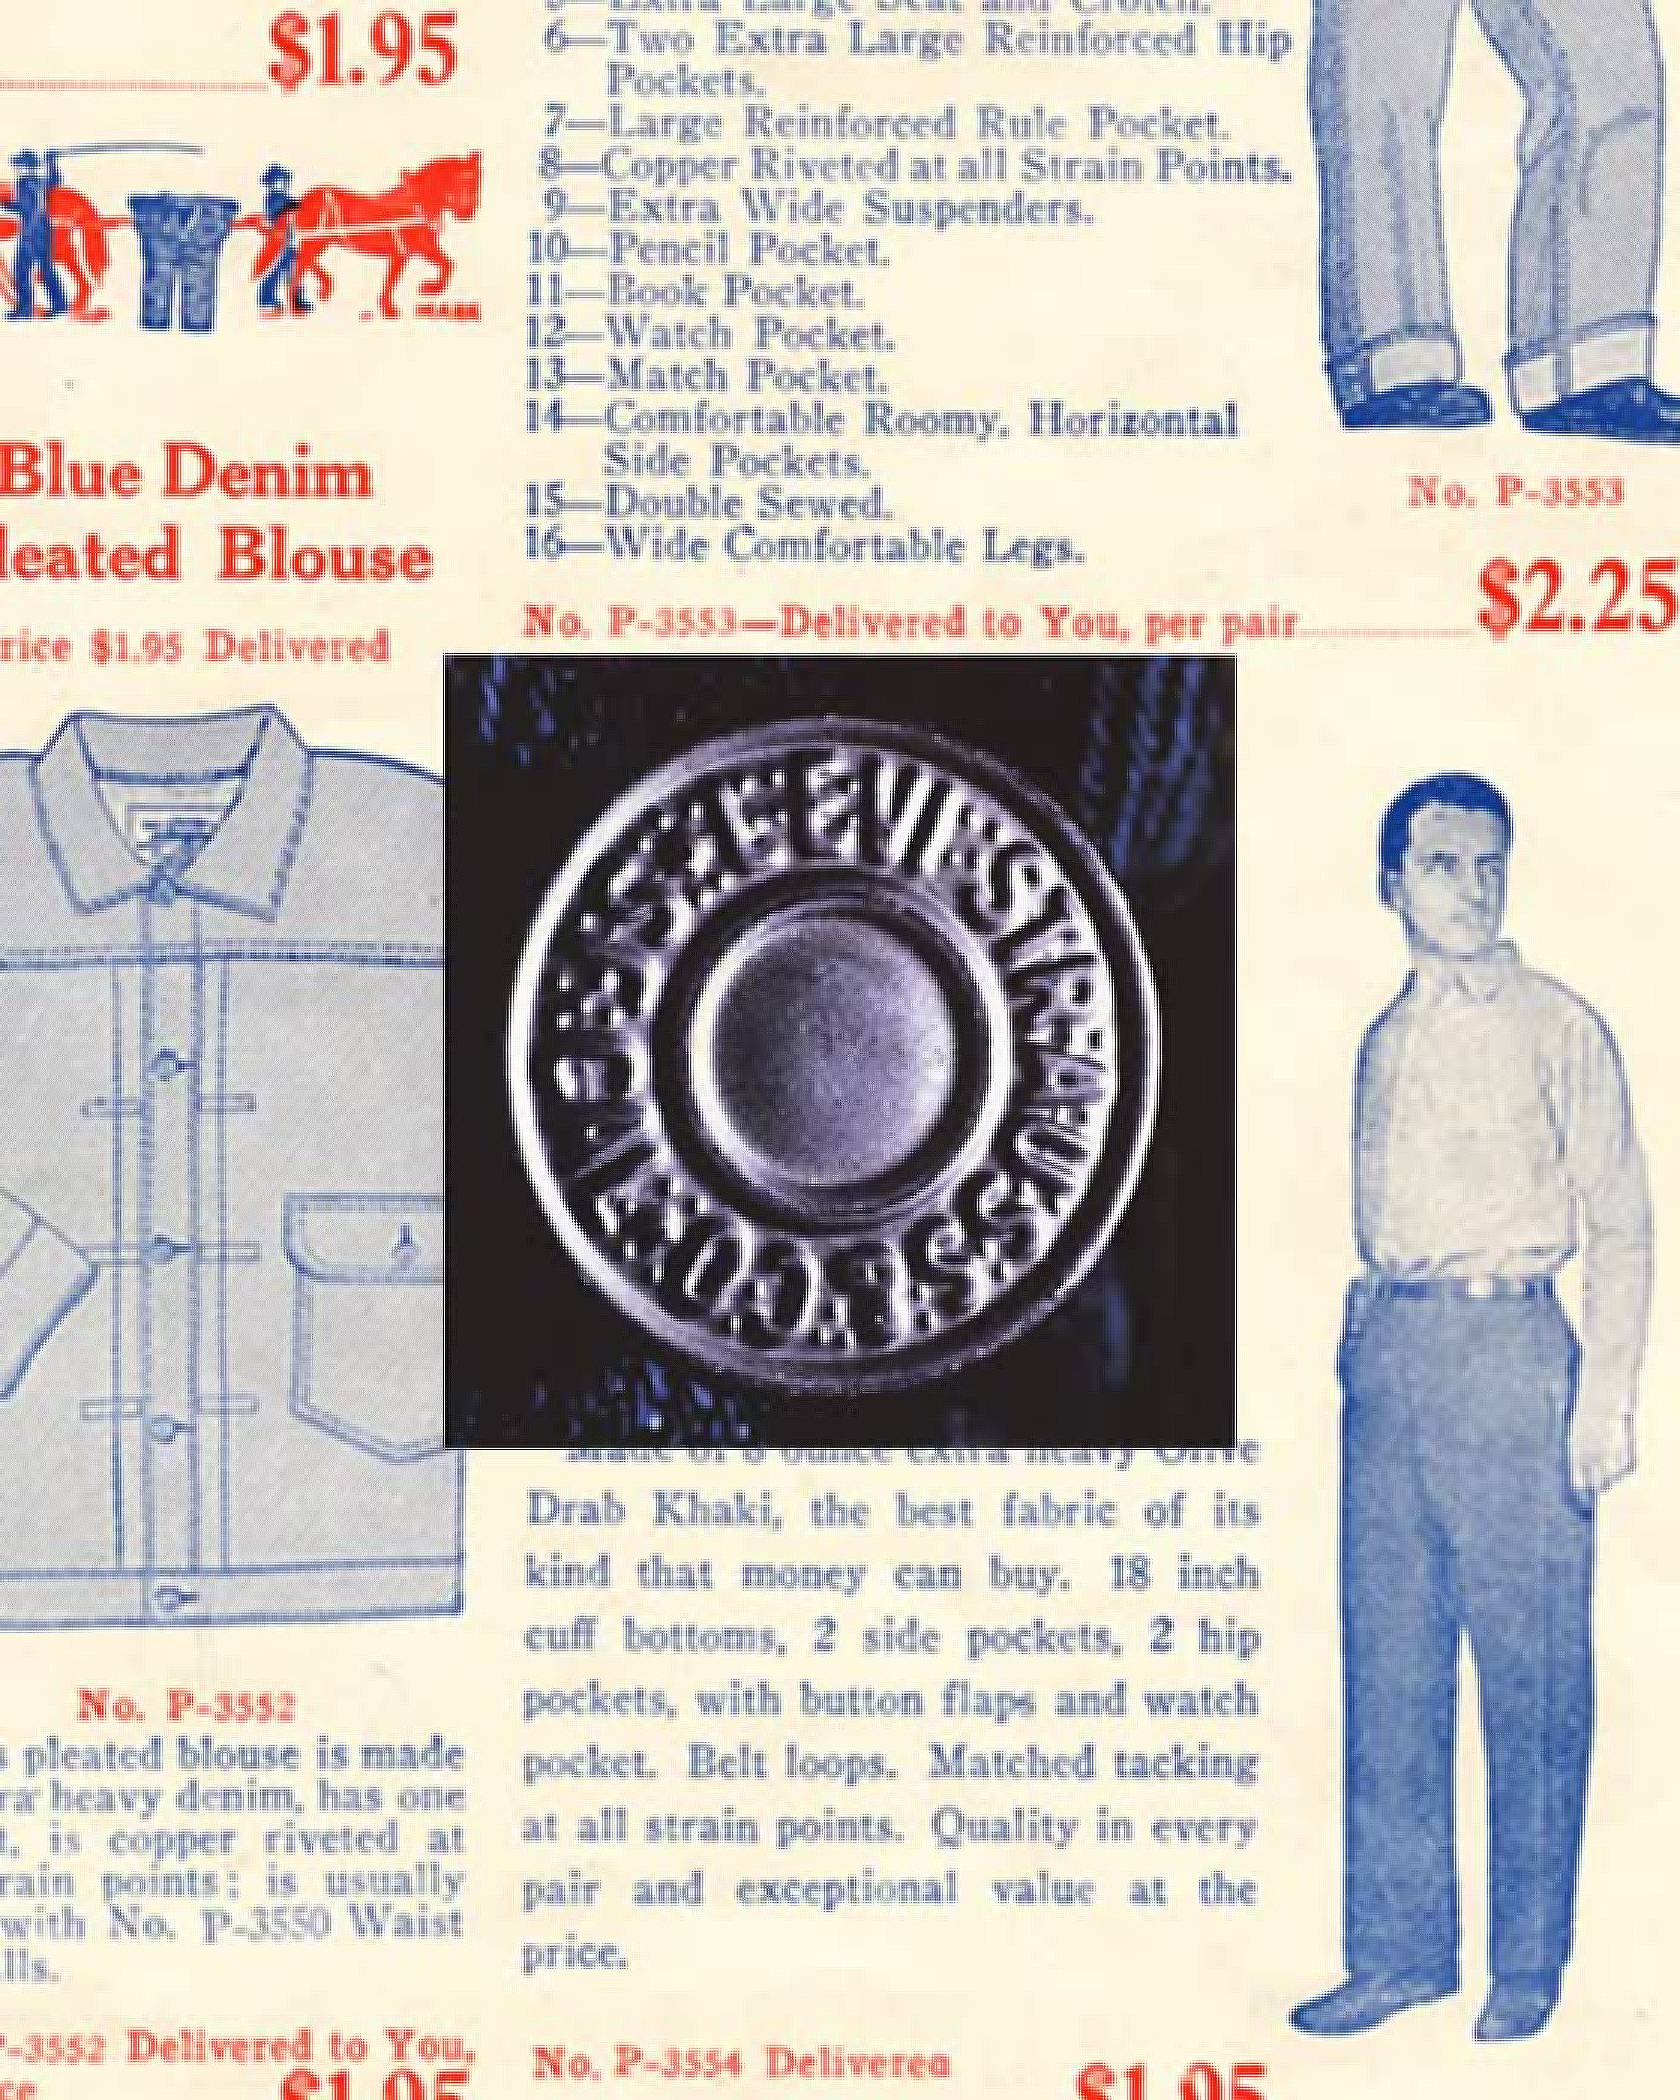 A old Levi's ad in a magazine